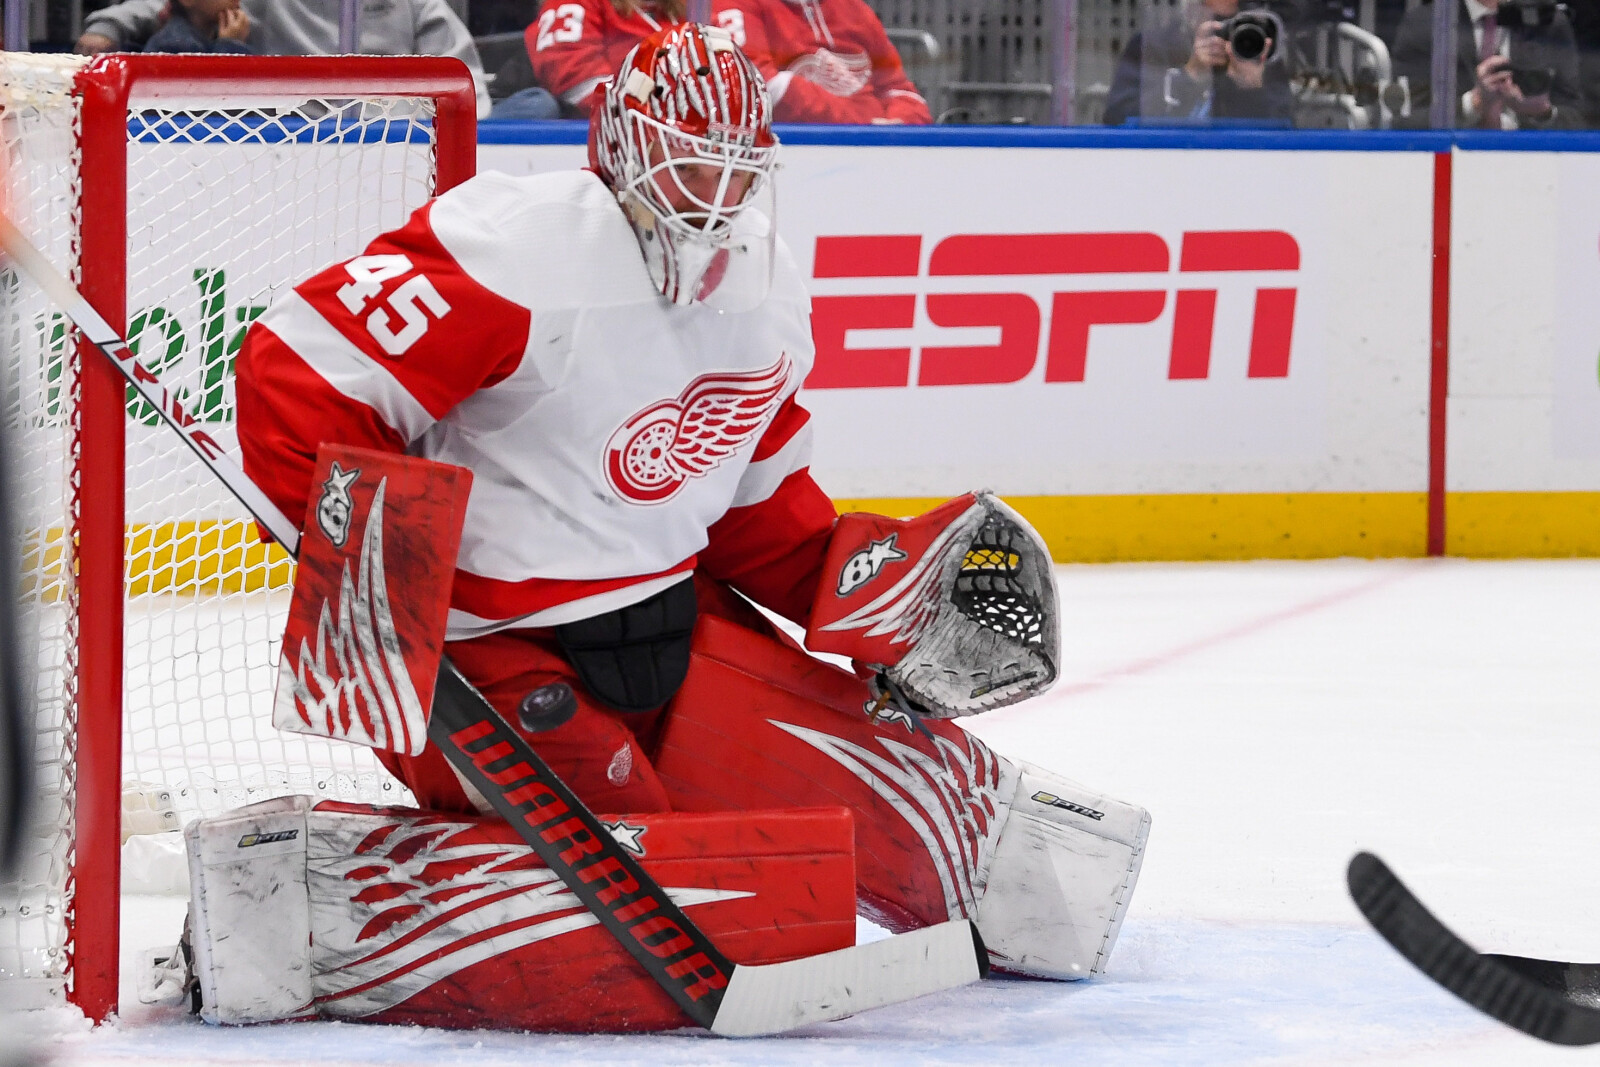 Red Wings assign Magnus Hellberg to Griffins for conditioning :  r/DetroitRedWings